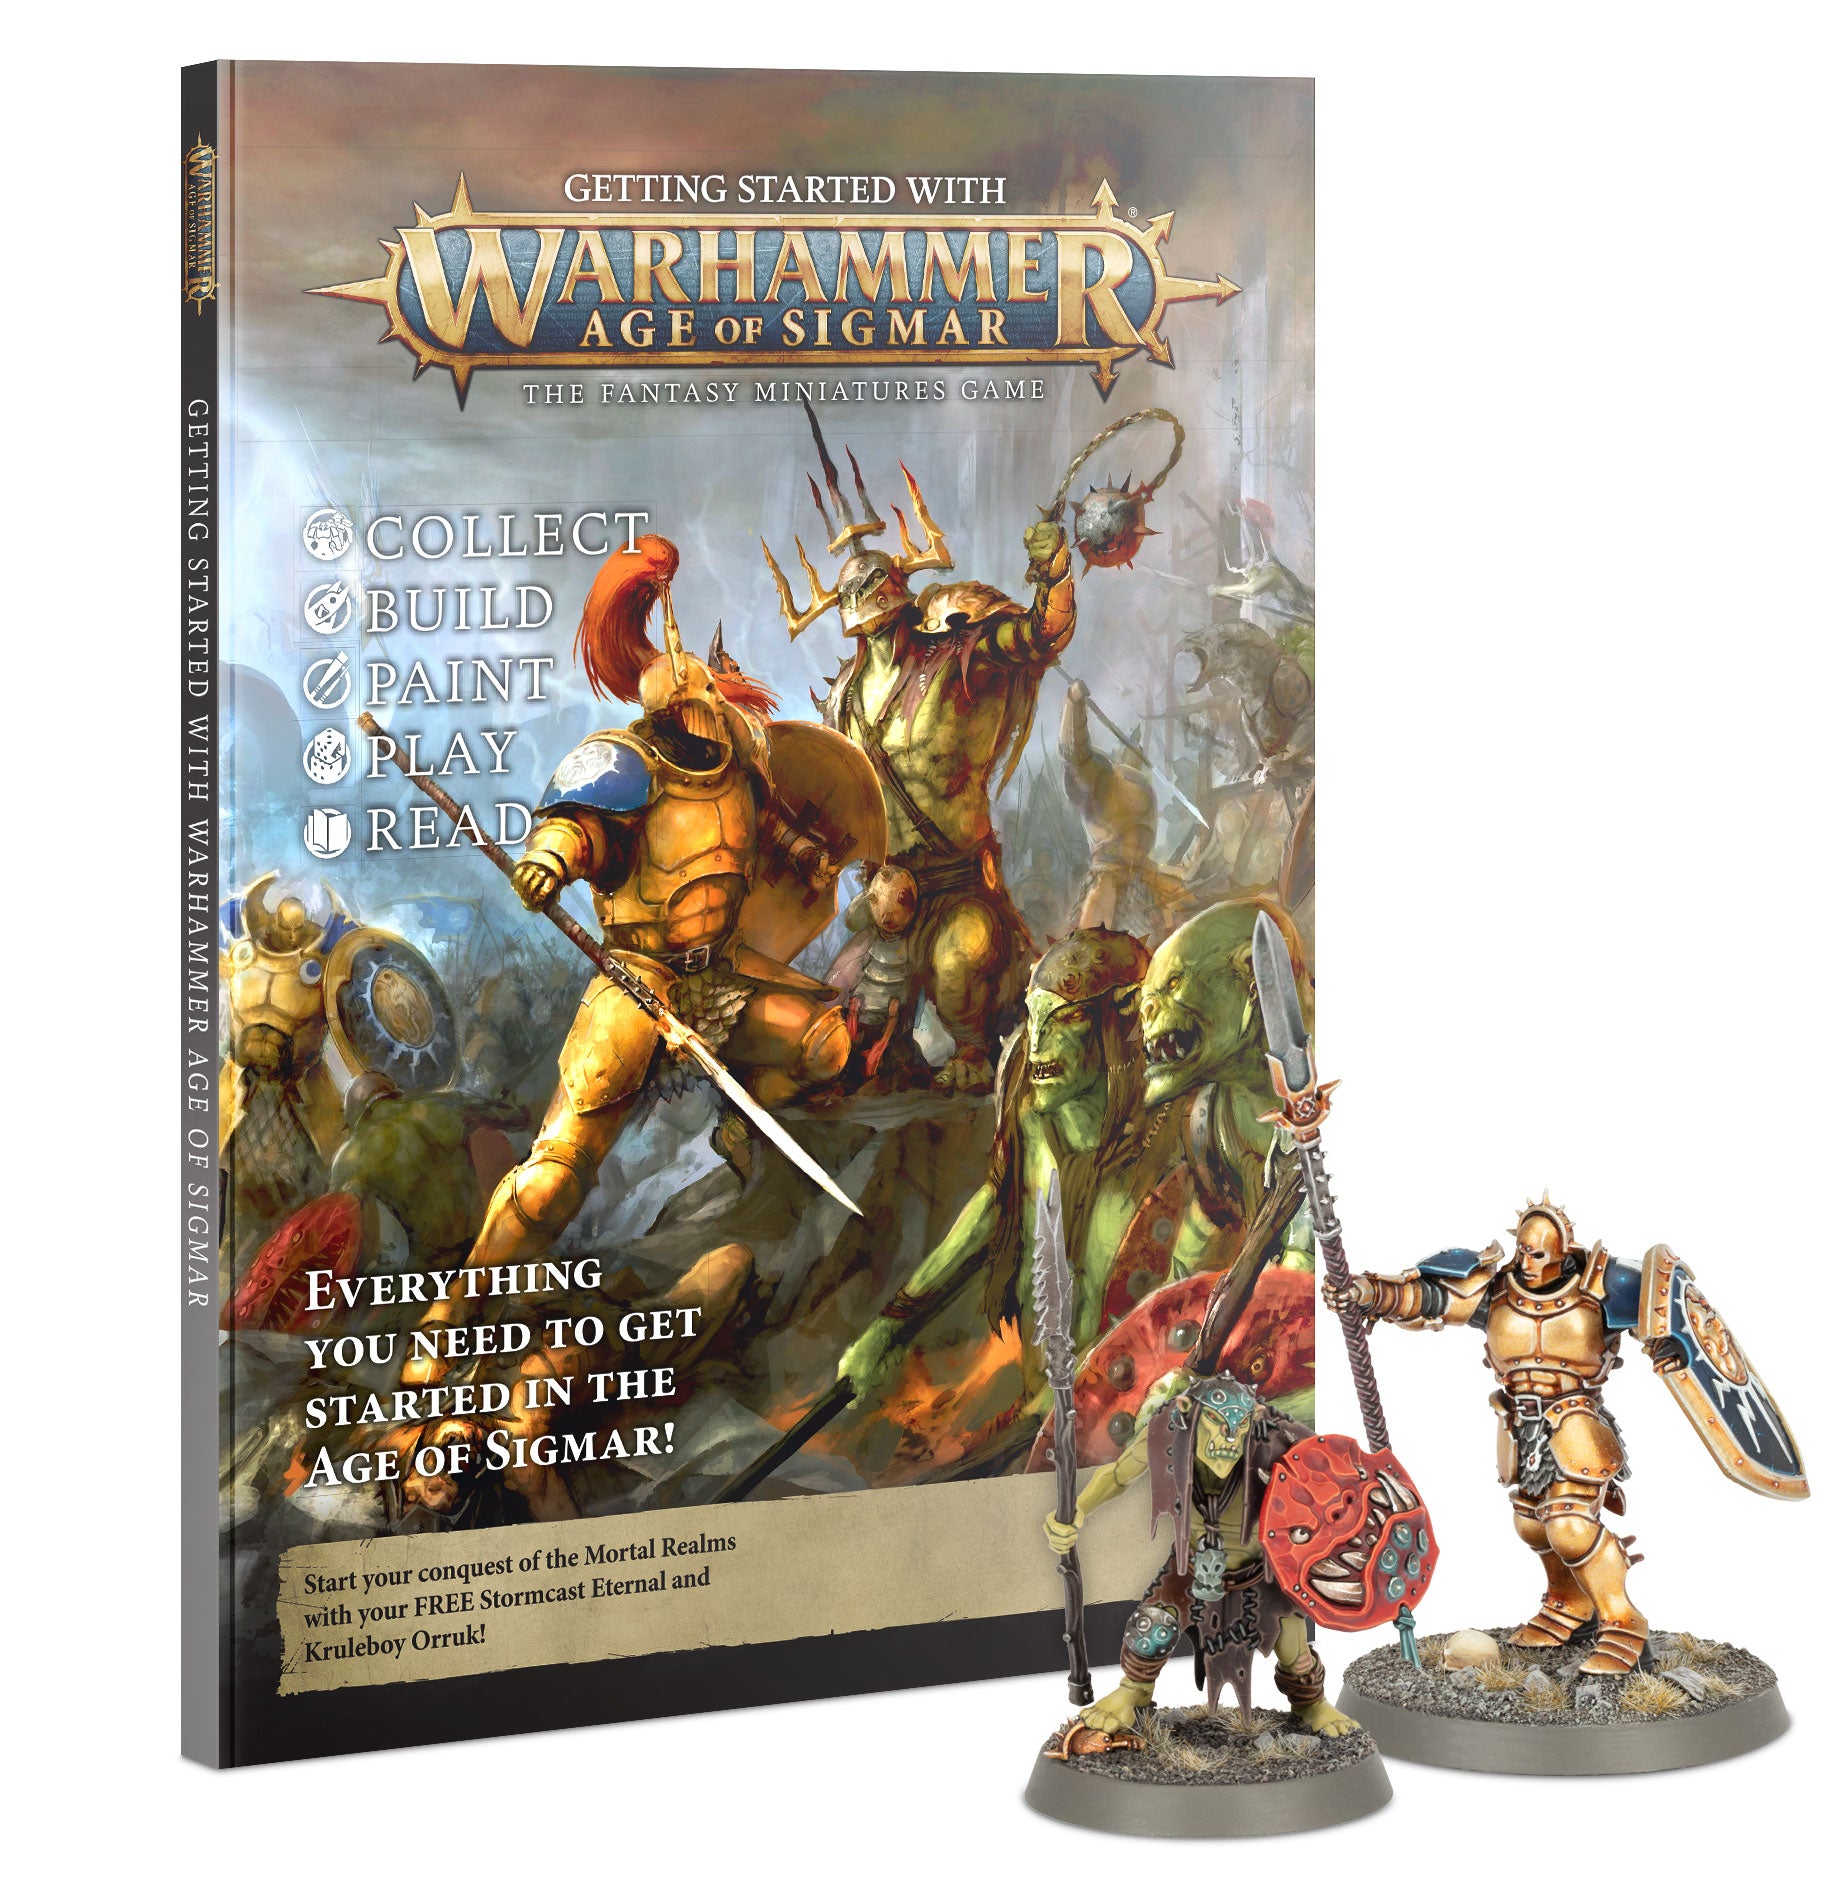 Getting started with Age of Sigmar – Warforged Gaming LLC